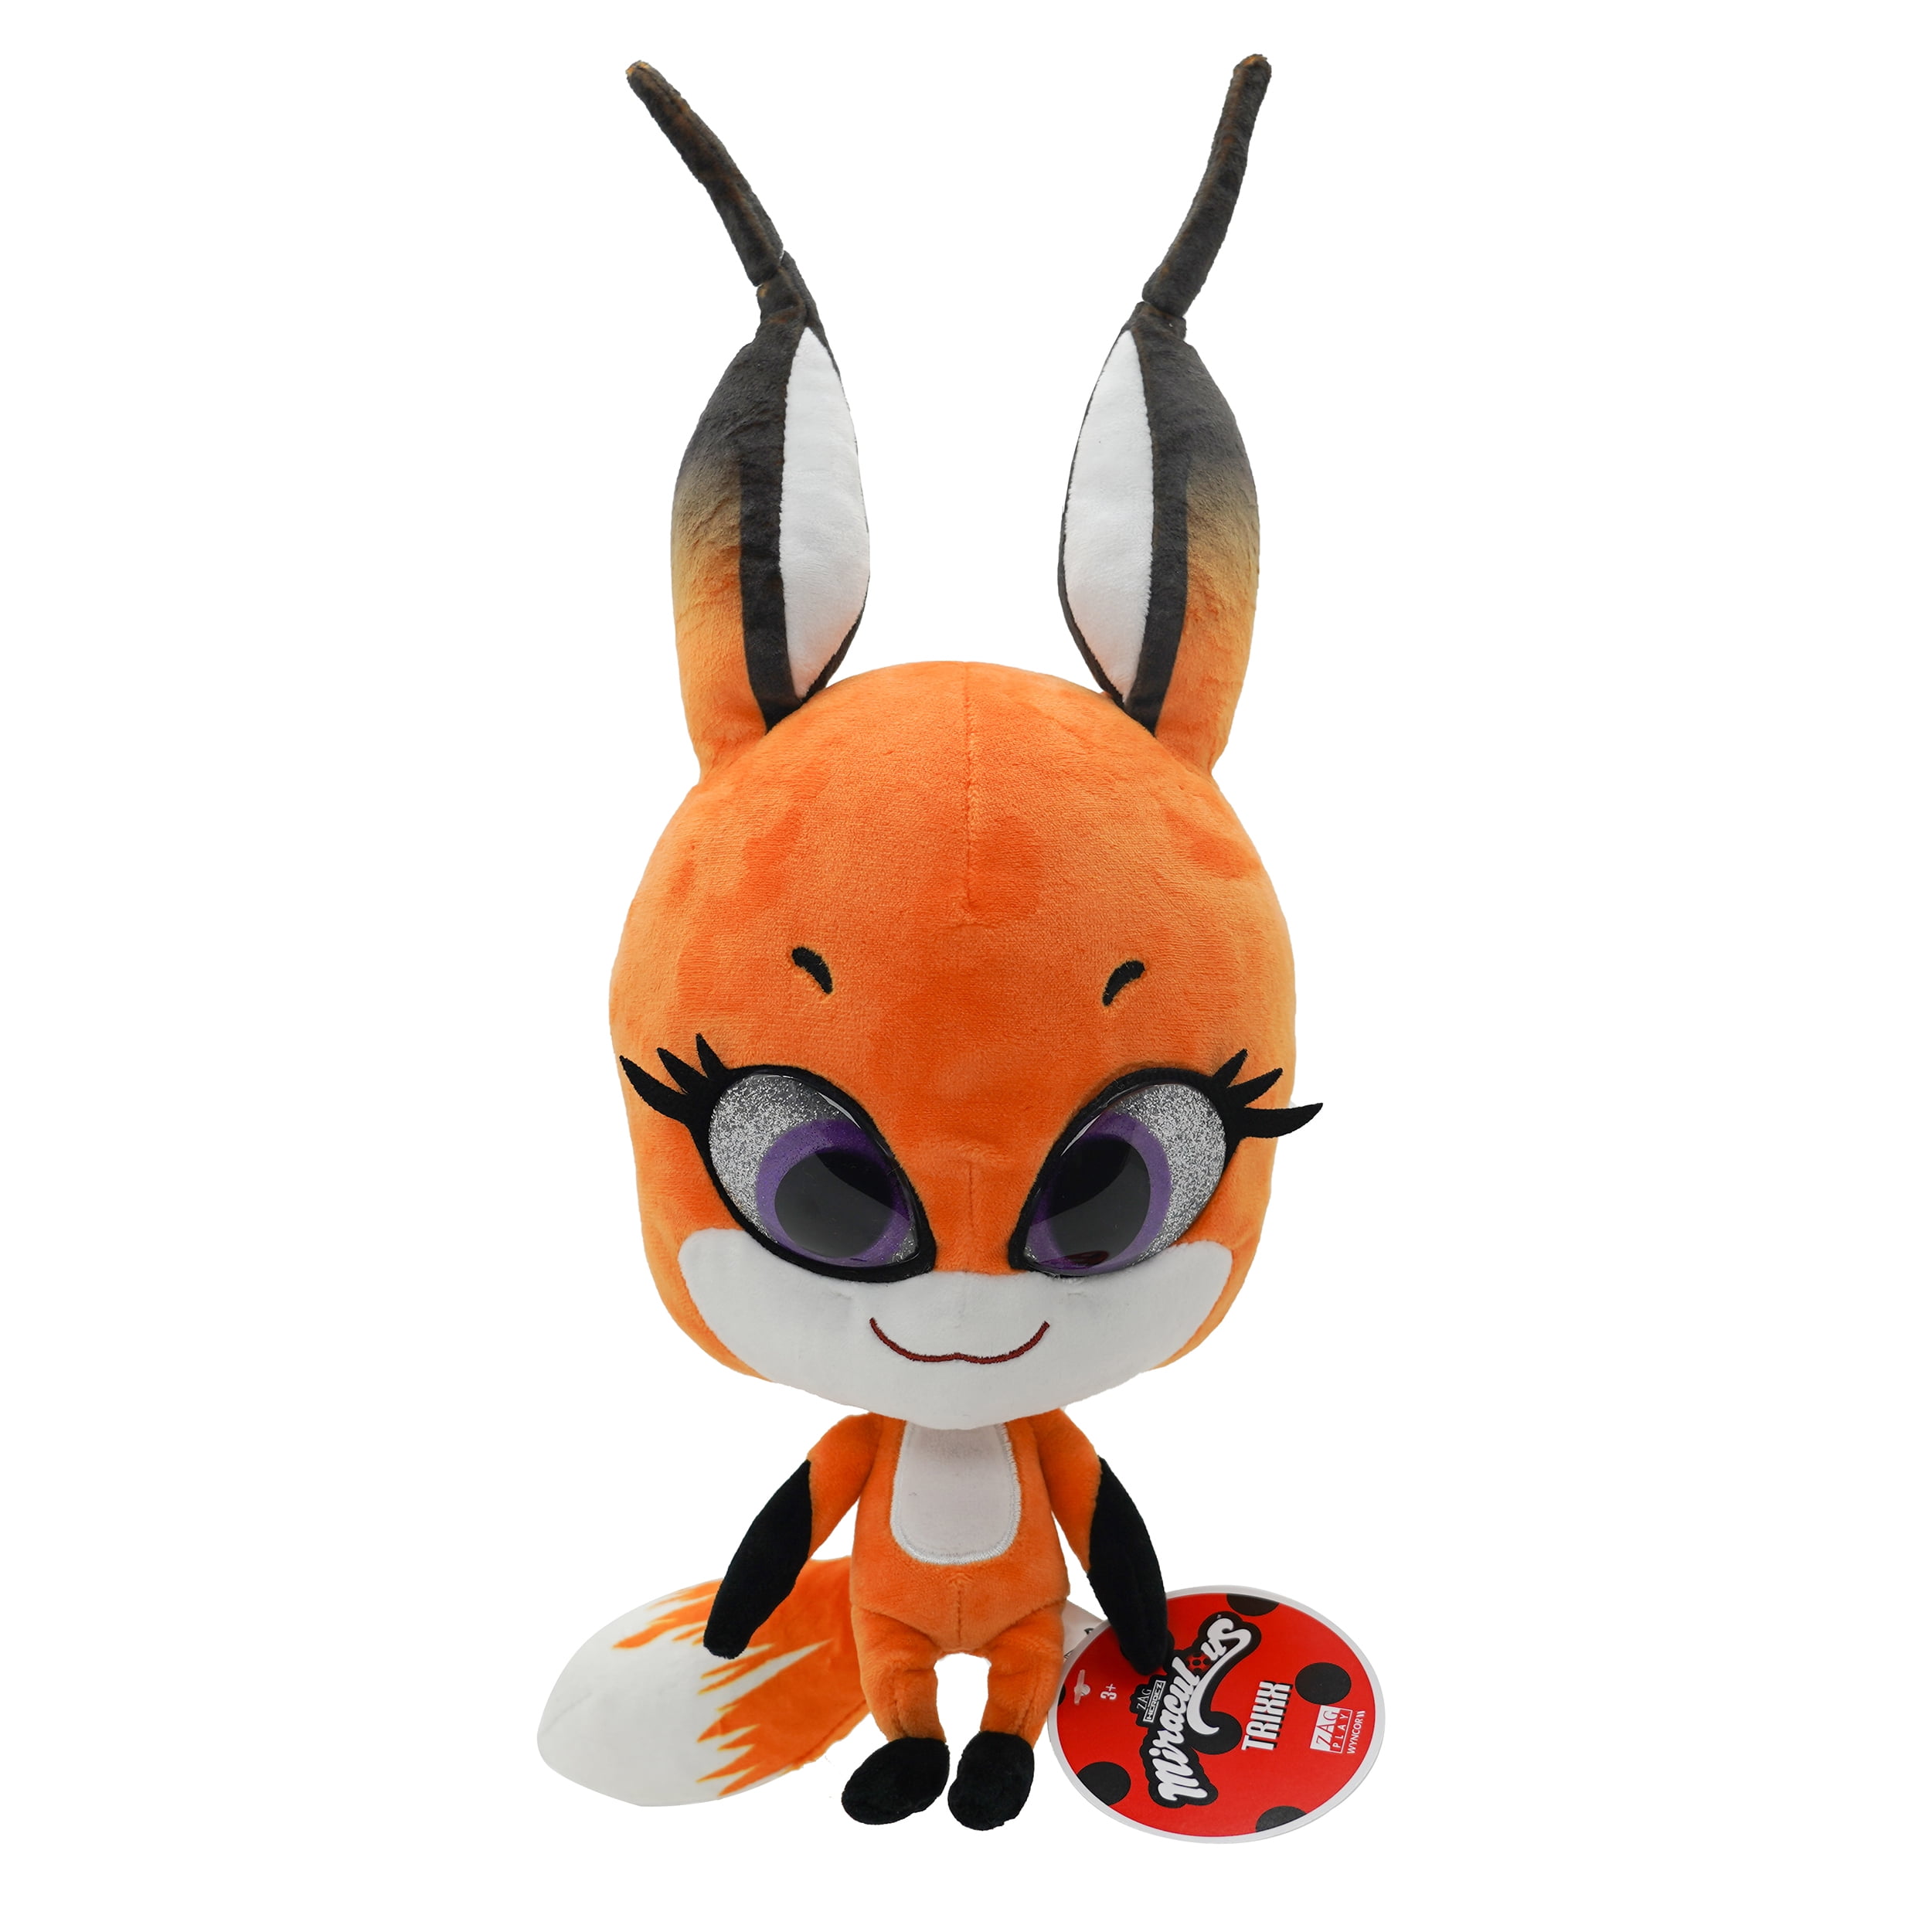 Miraculous Ladybug - Kwami Mon Ami Trixx, 9-inch Fox Plush Toys for Kids,  Super Soft Stuffed Toy with Resin Eyes, High Glitter and Gloss, and  Detailed Stitching Finishes, Wyncor 